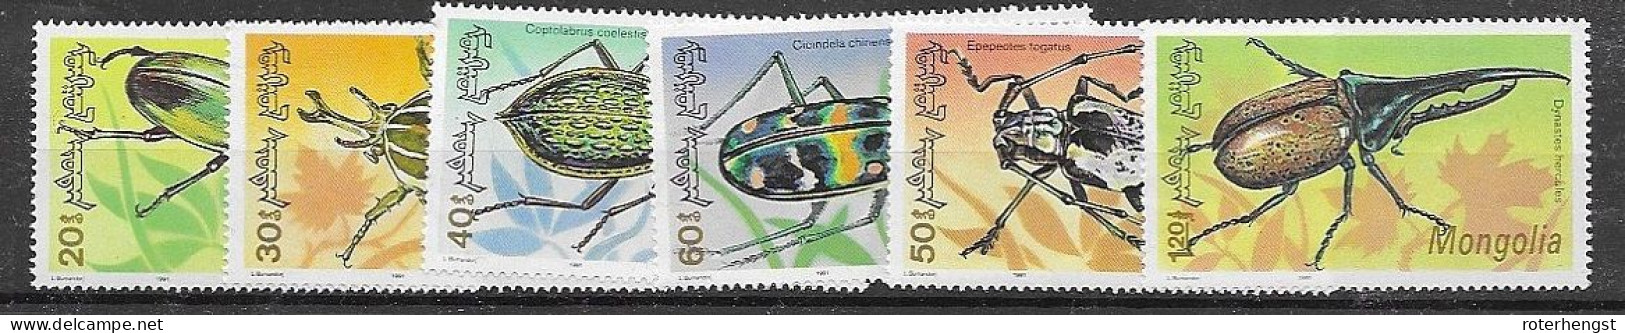 Mongolia Mnh ** 1991 Incomplete Insects Set 6 Euros (80M Missing) - Mongolia